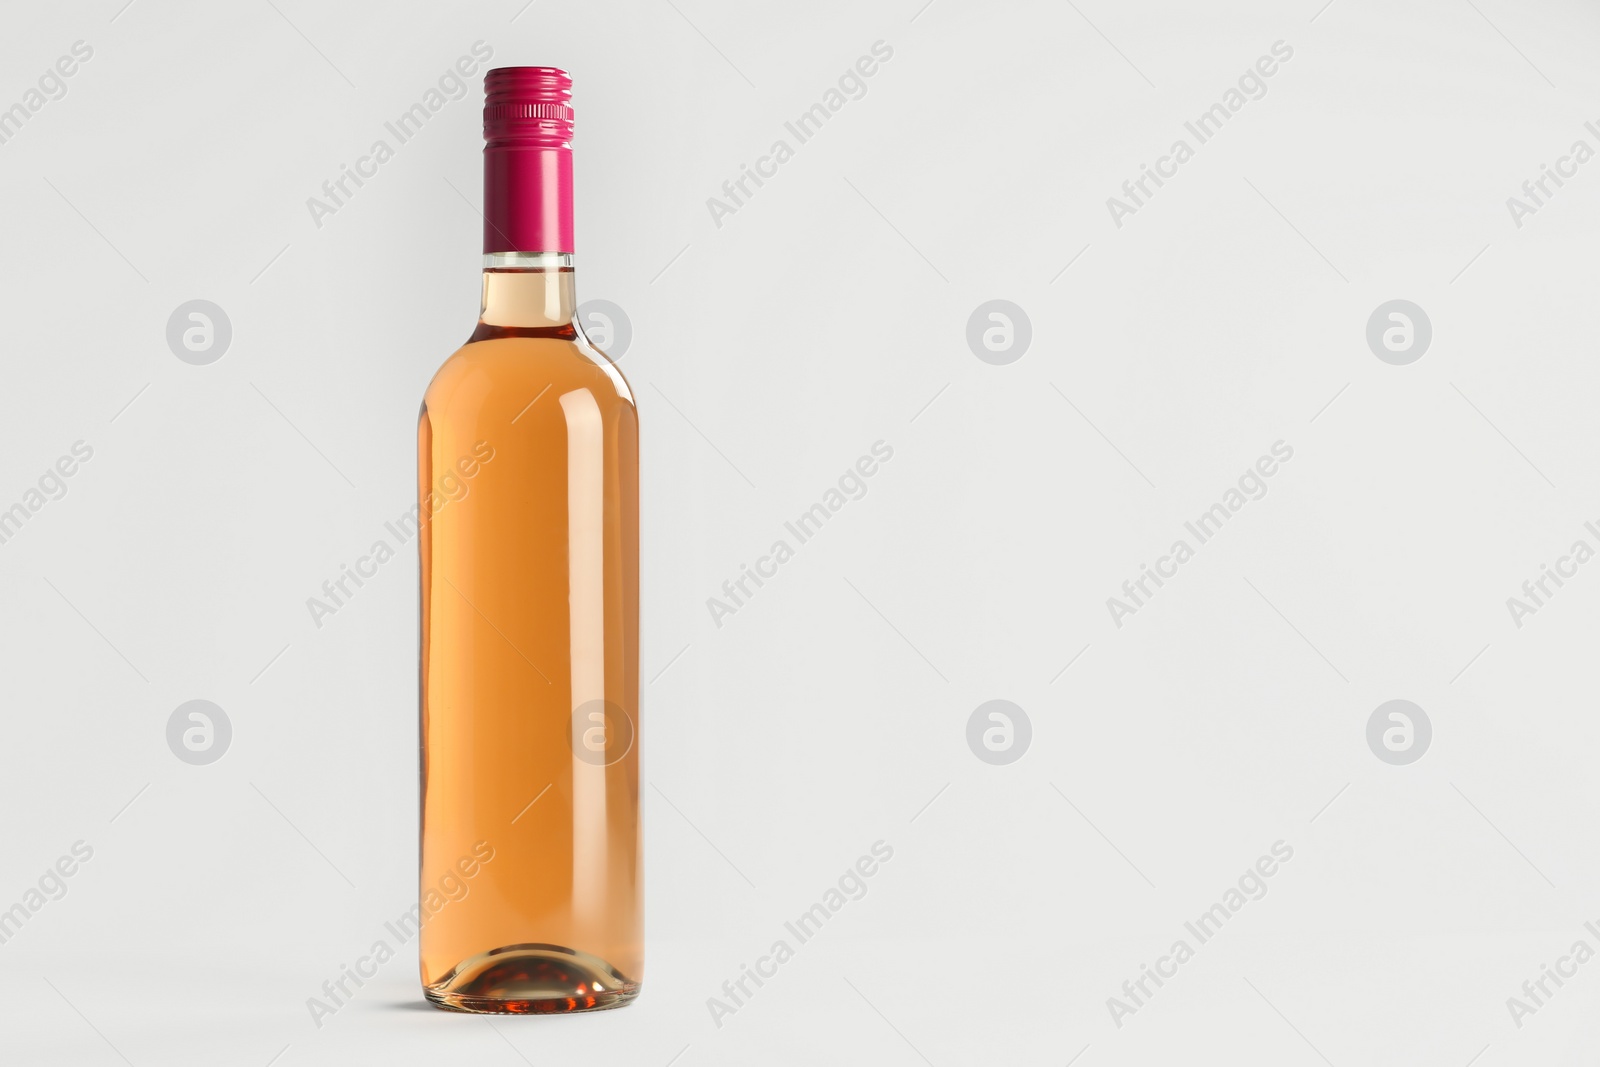 Photo of Bottle of expensive rose wine on light background. Space for text